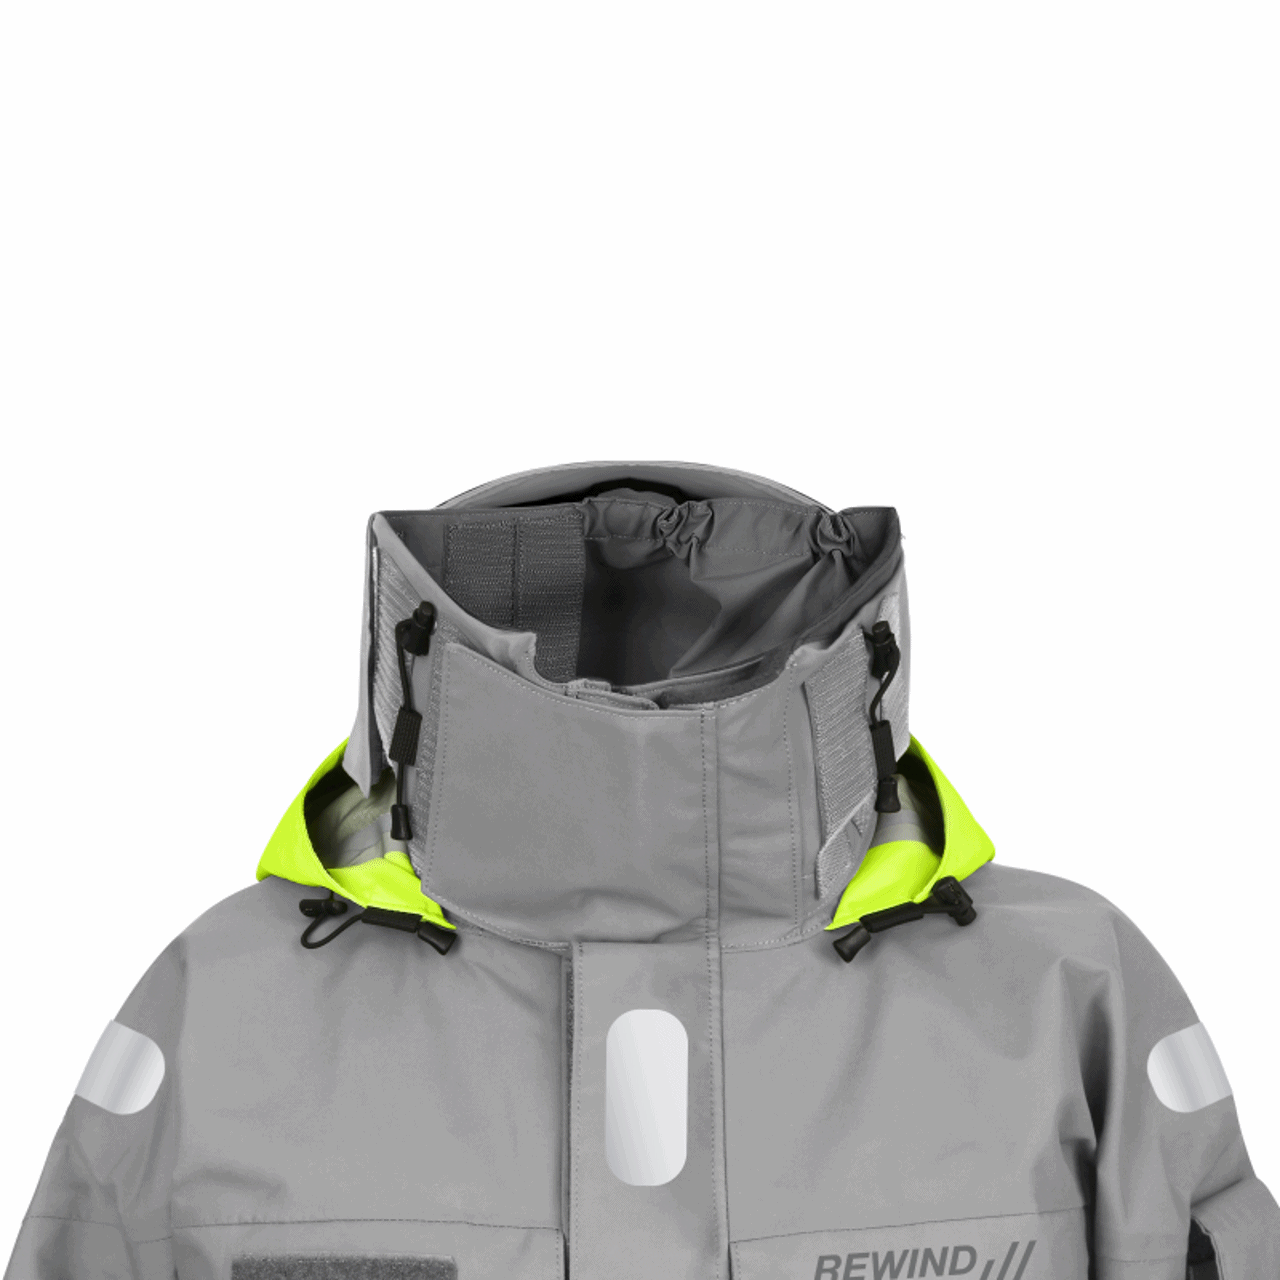 Offshore Yacht Jacket (GRAY)